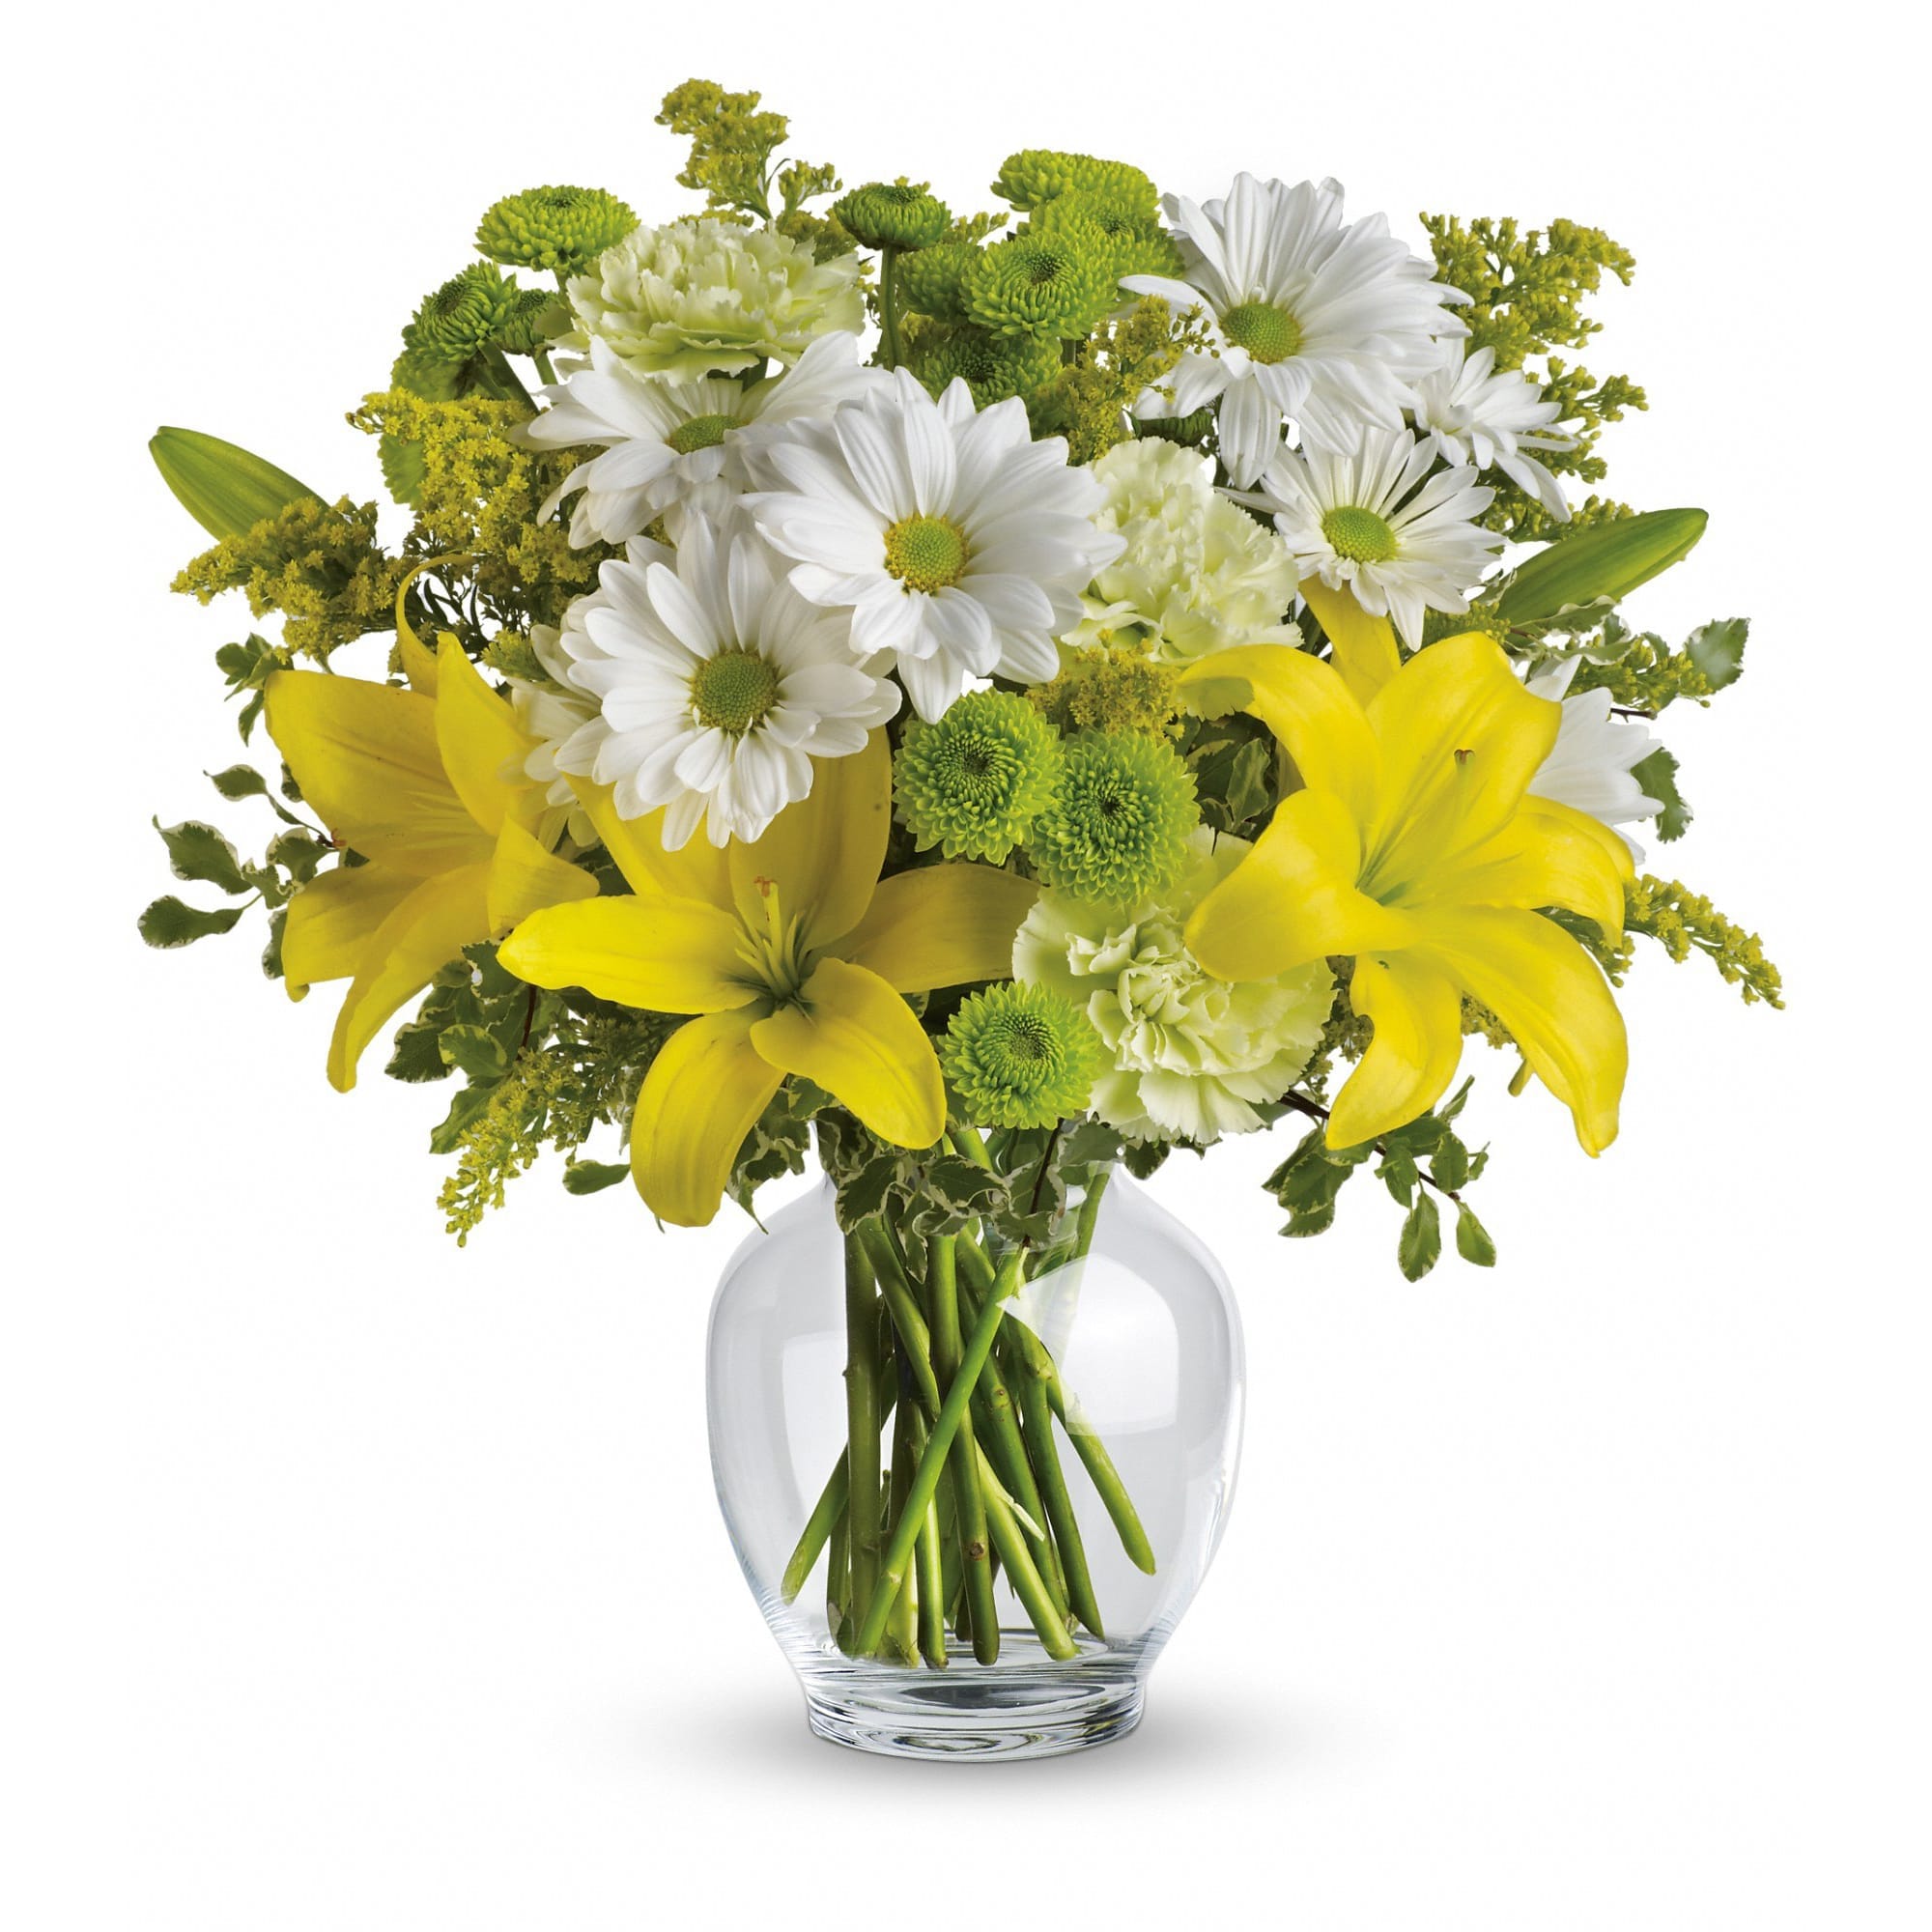 Teleflora's Brightly Blooming - Let the sunshine in with this bevy of bright blooms - yellow lilies, green carnations and other sunny favorites beautifully arranged in a classic ginger jar. Perfect for birthday, get well, thank you - or just to say &quot;Hi!&quot; They'll love it. 